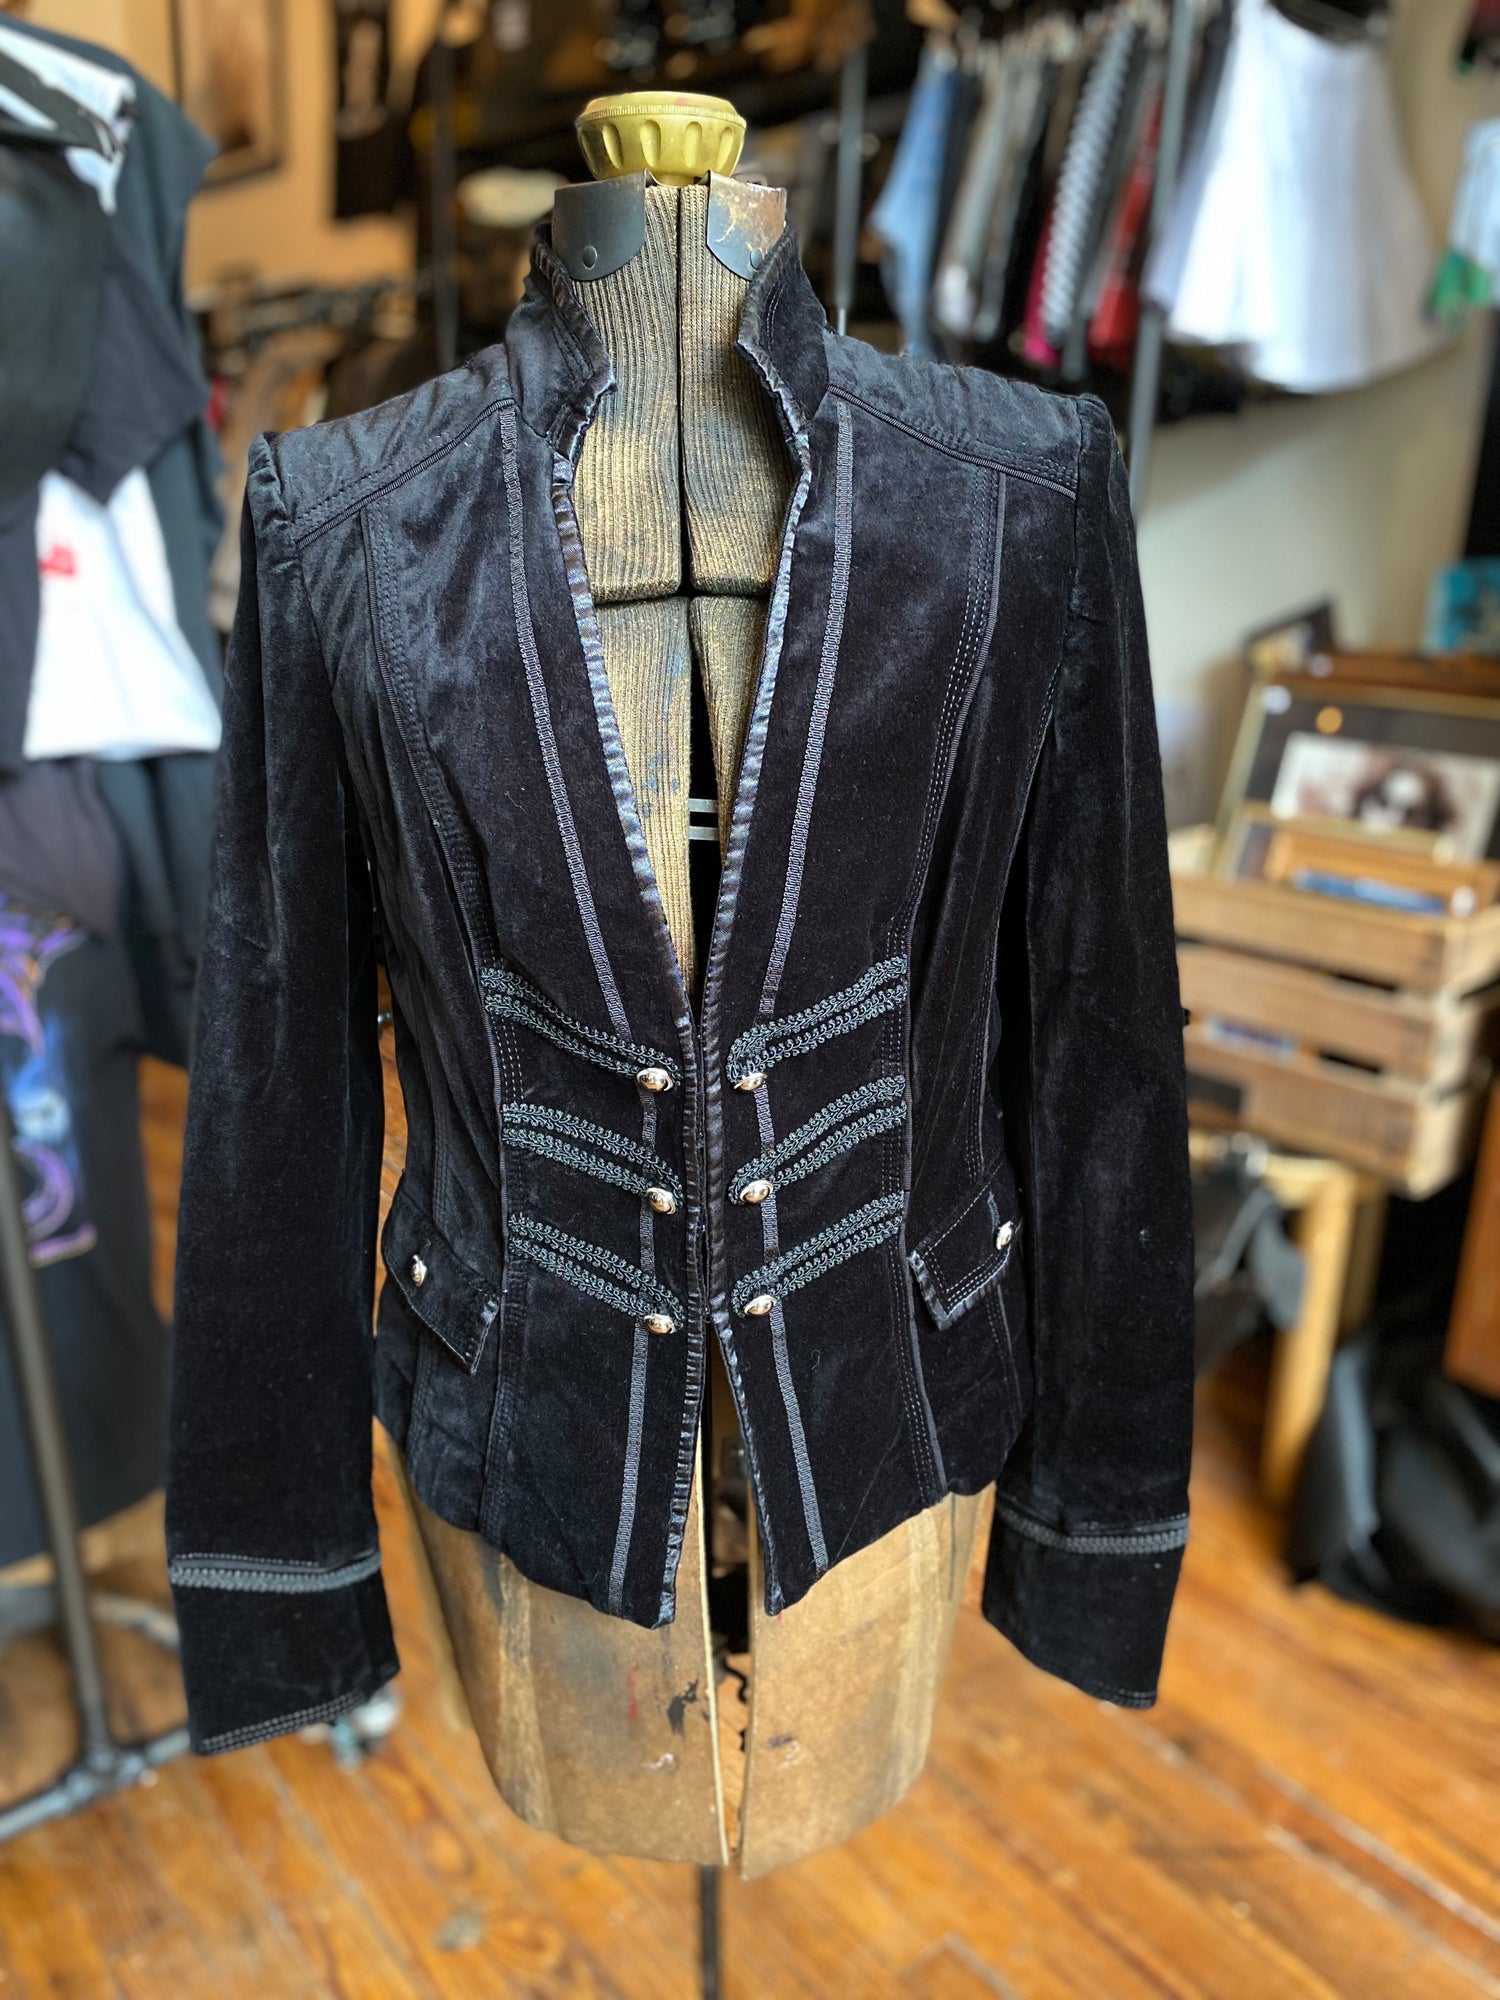 Welcome to the Black Parade Velvet Marching Band Jacket